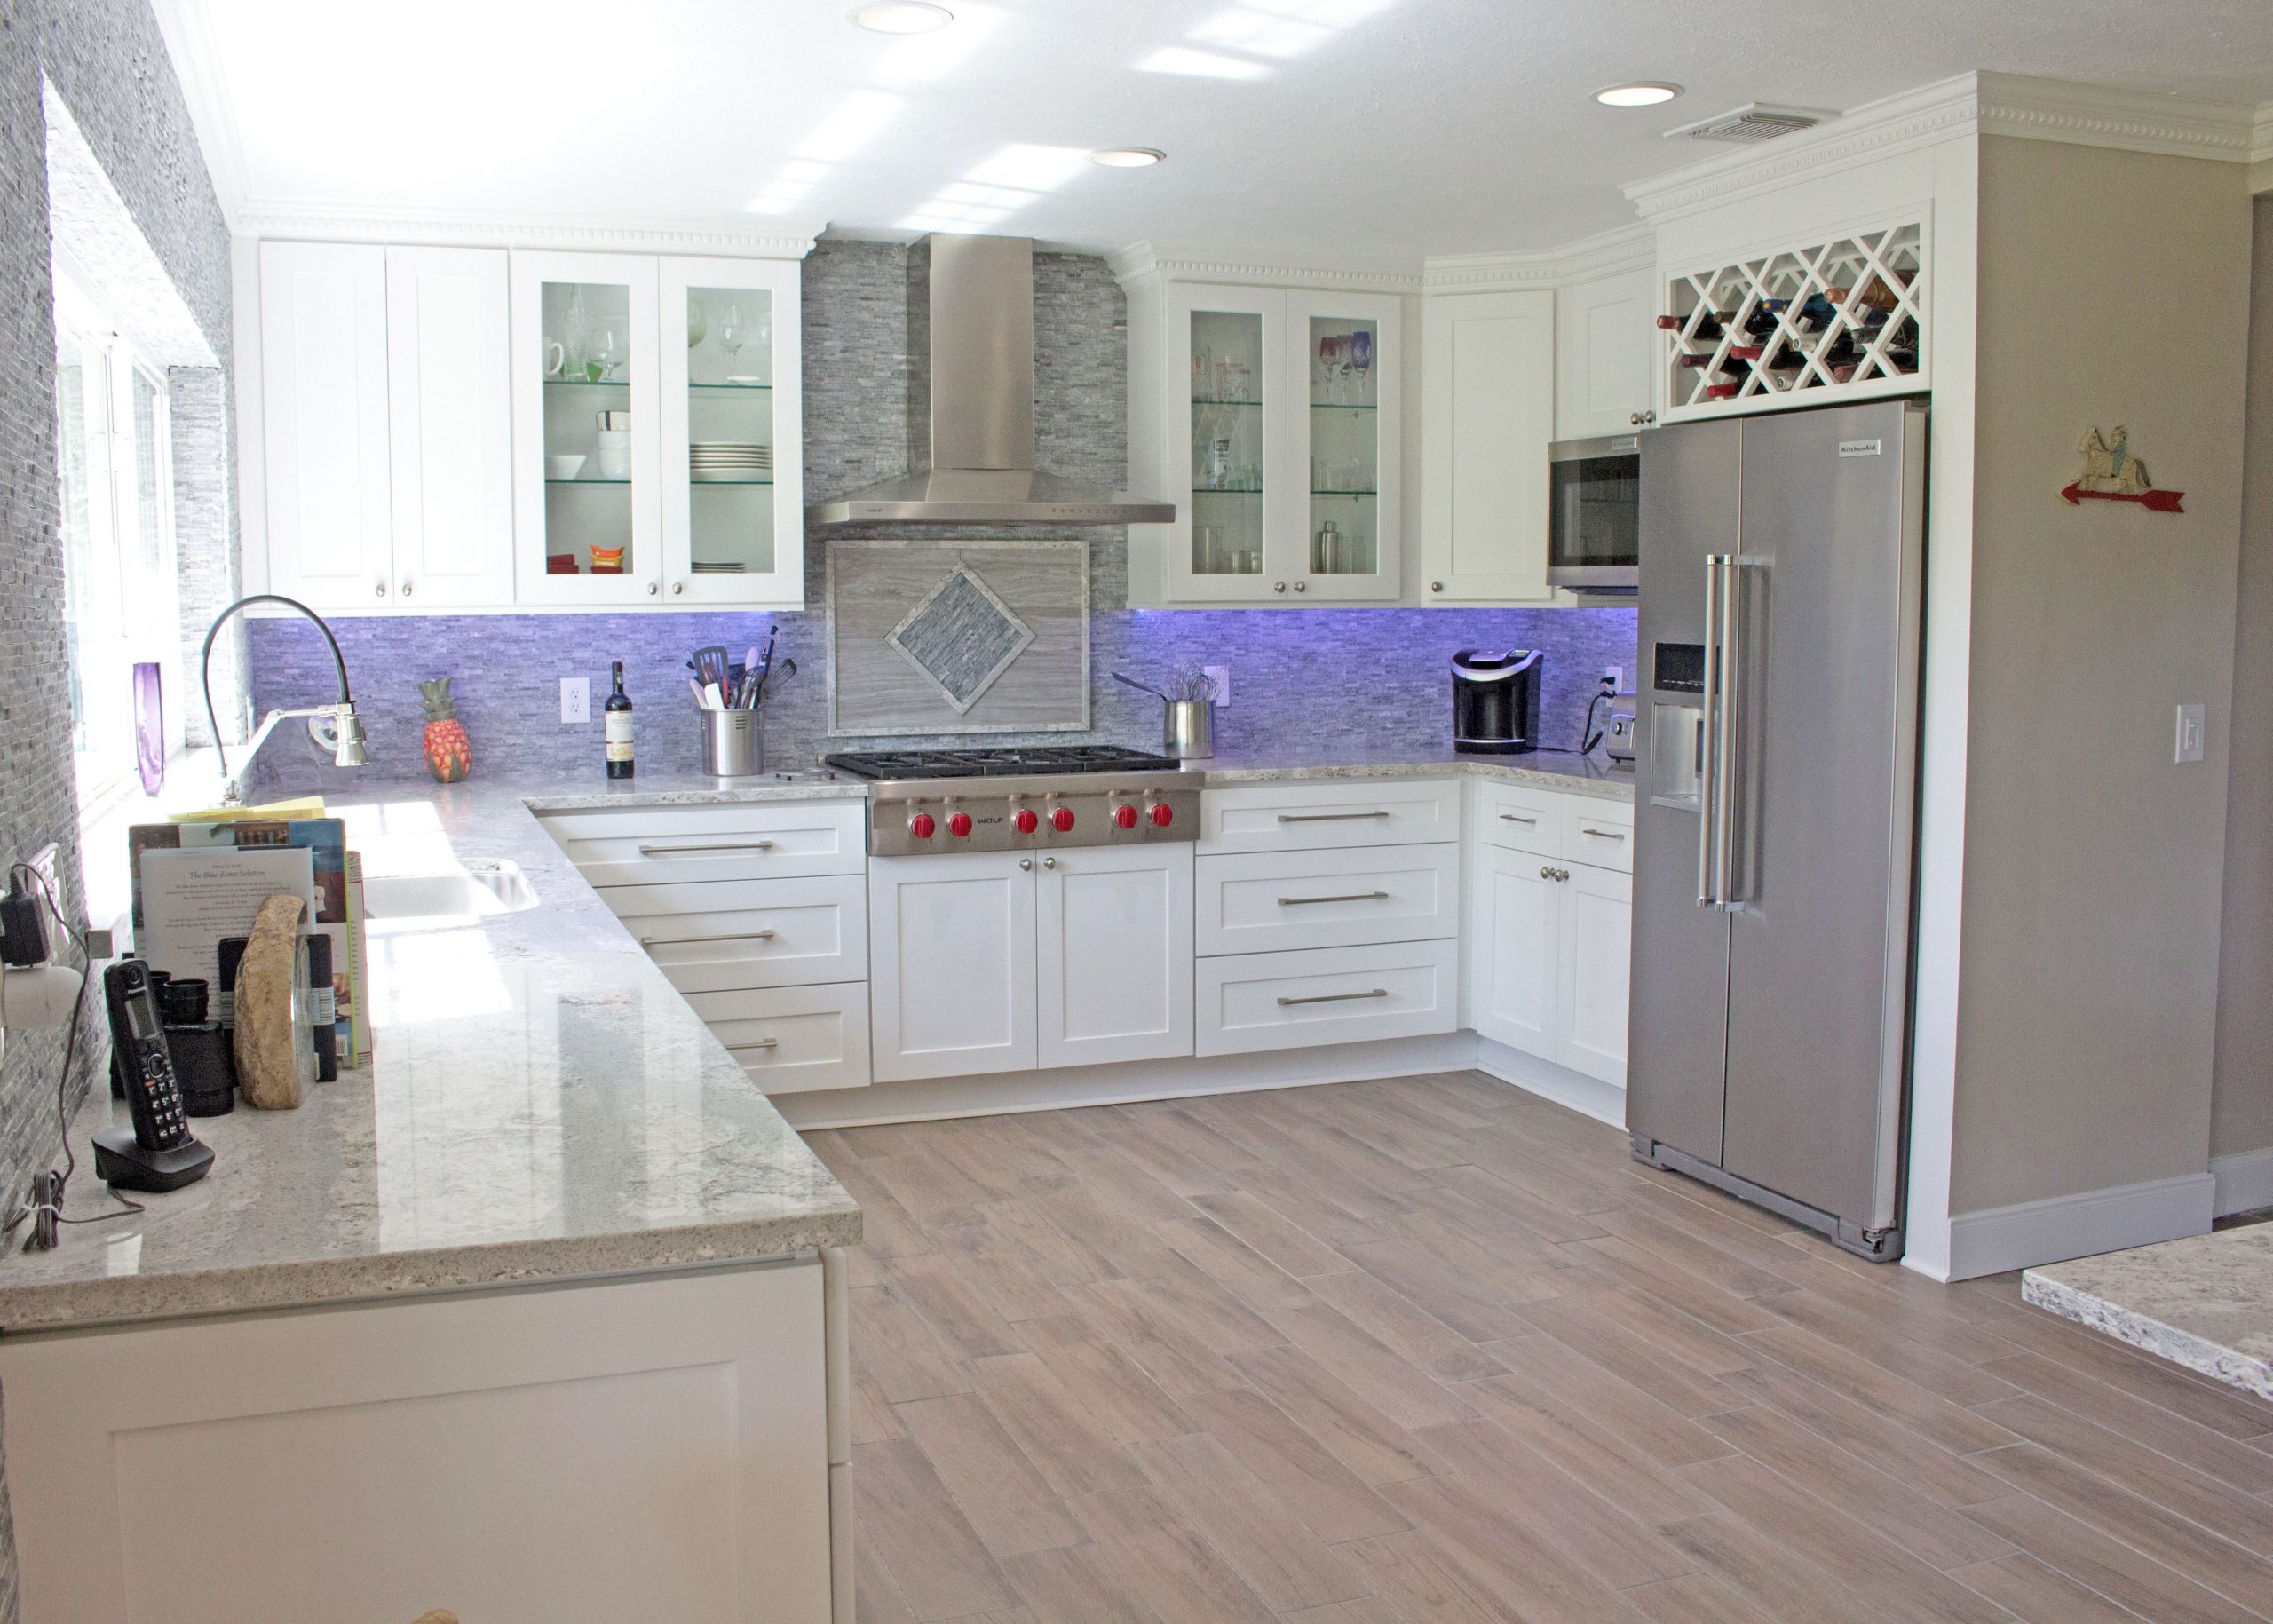 Shows Custom Under Cabinet Lighting in the Kitchen